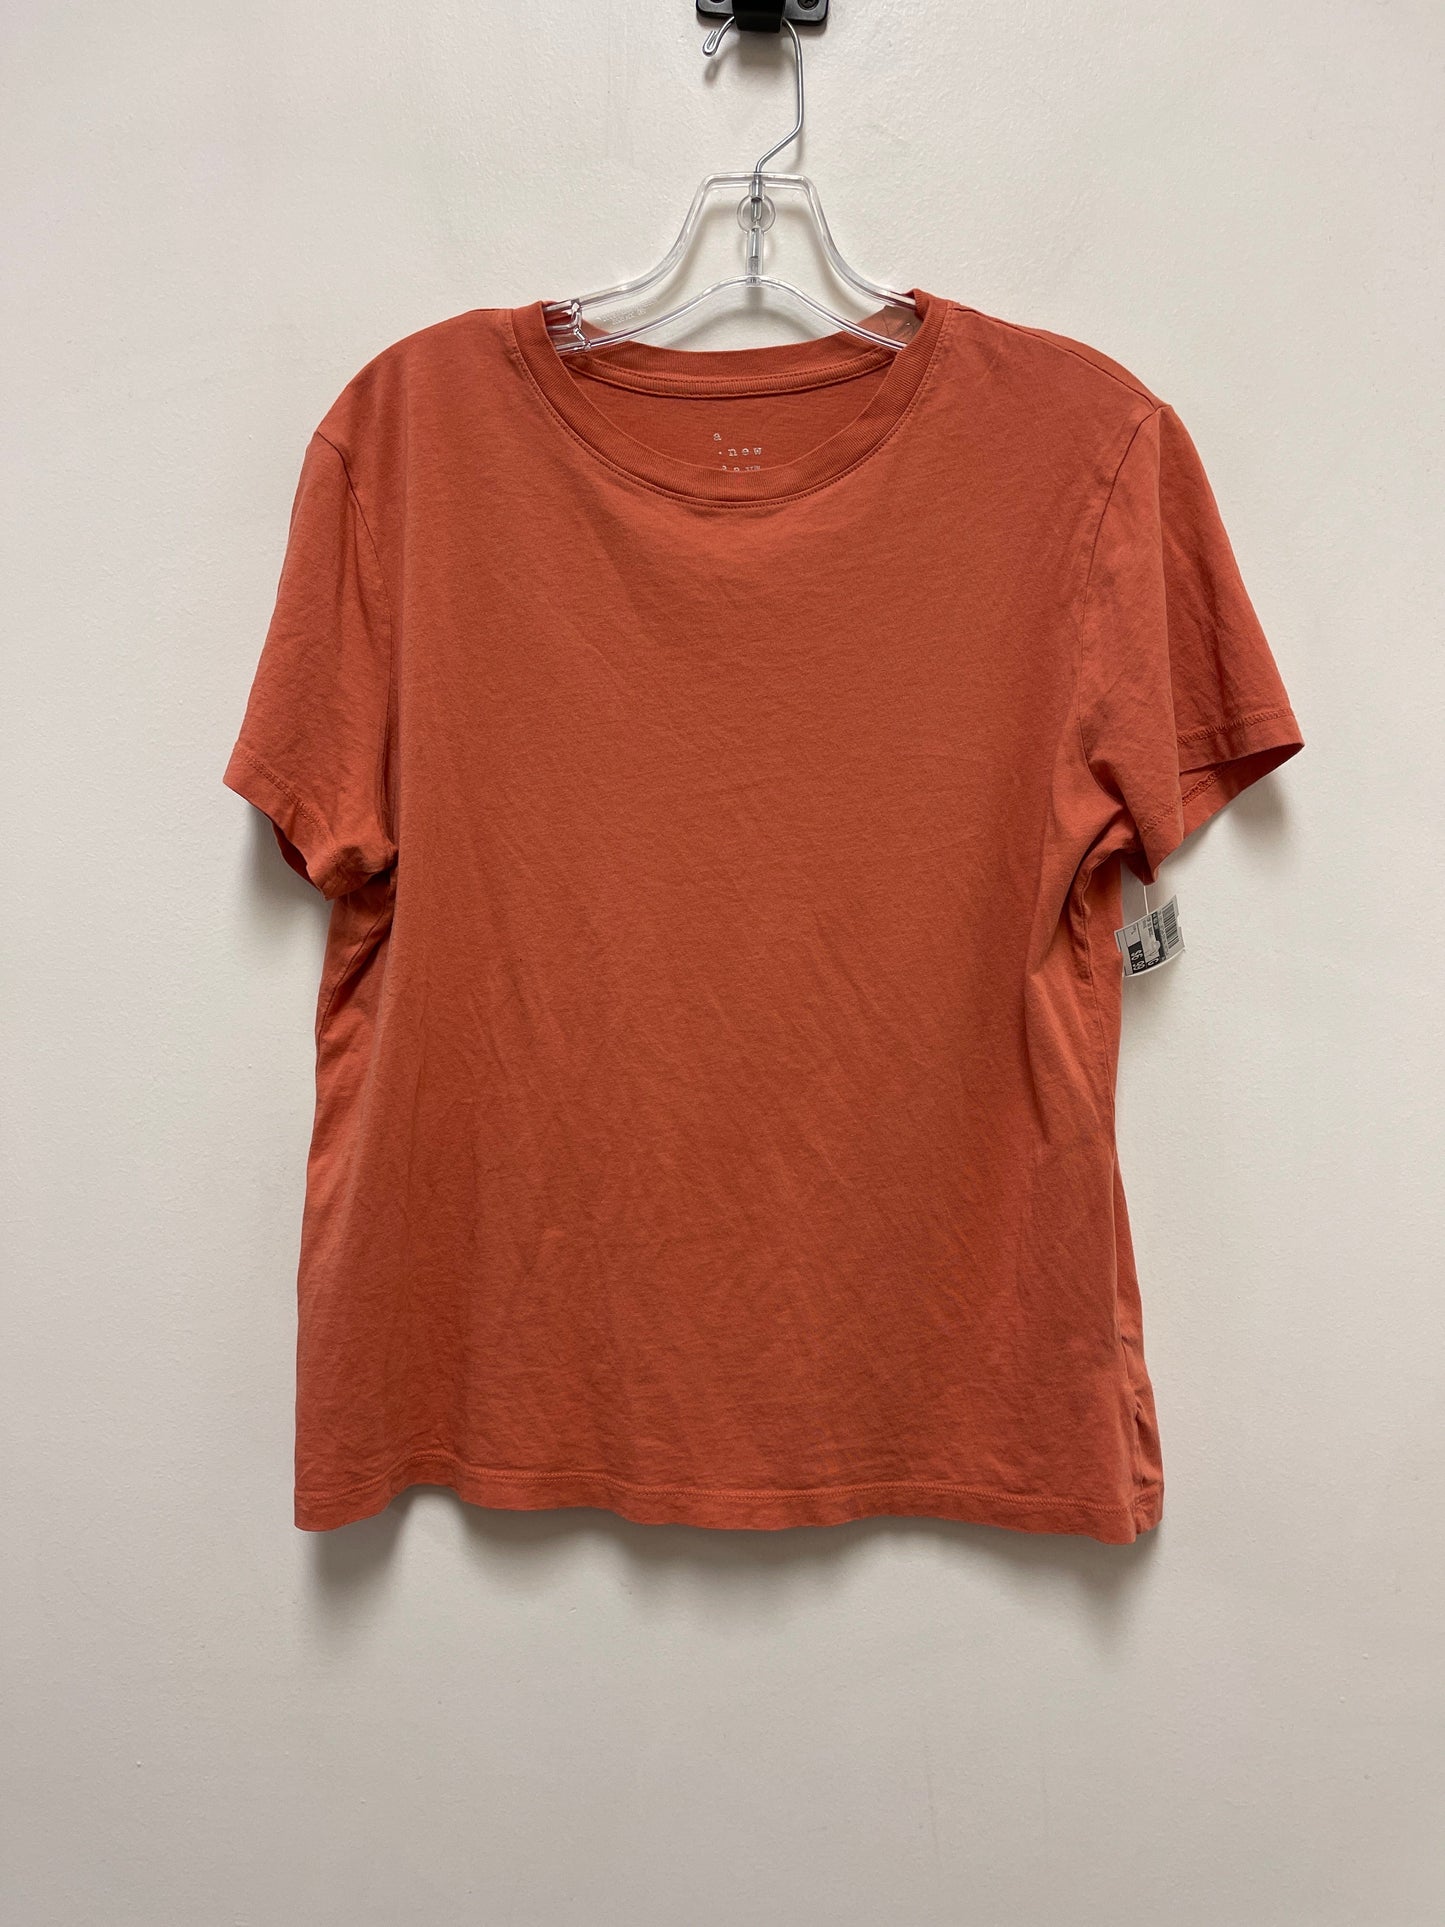 Orange Top Short Sleeve Basic A New Day, Size L